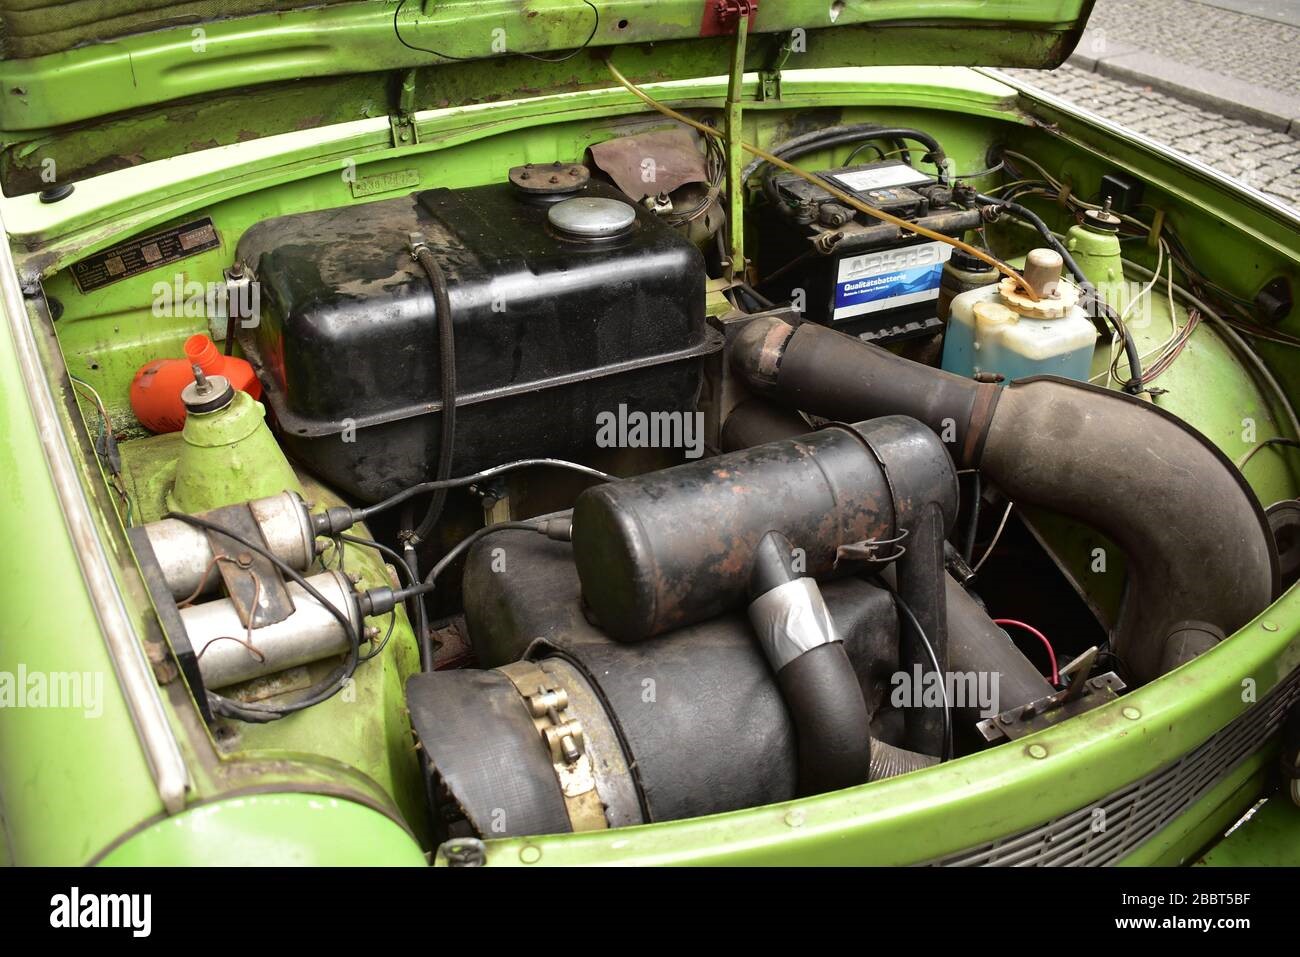 The open front hood of a green Trabant.